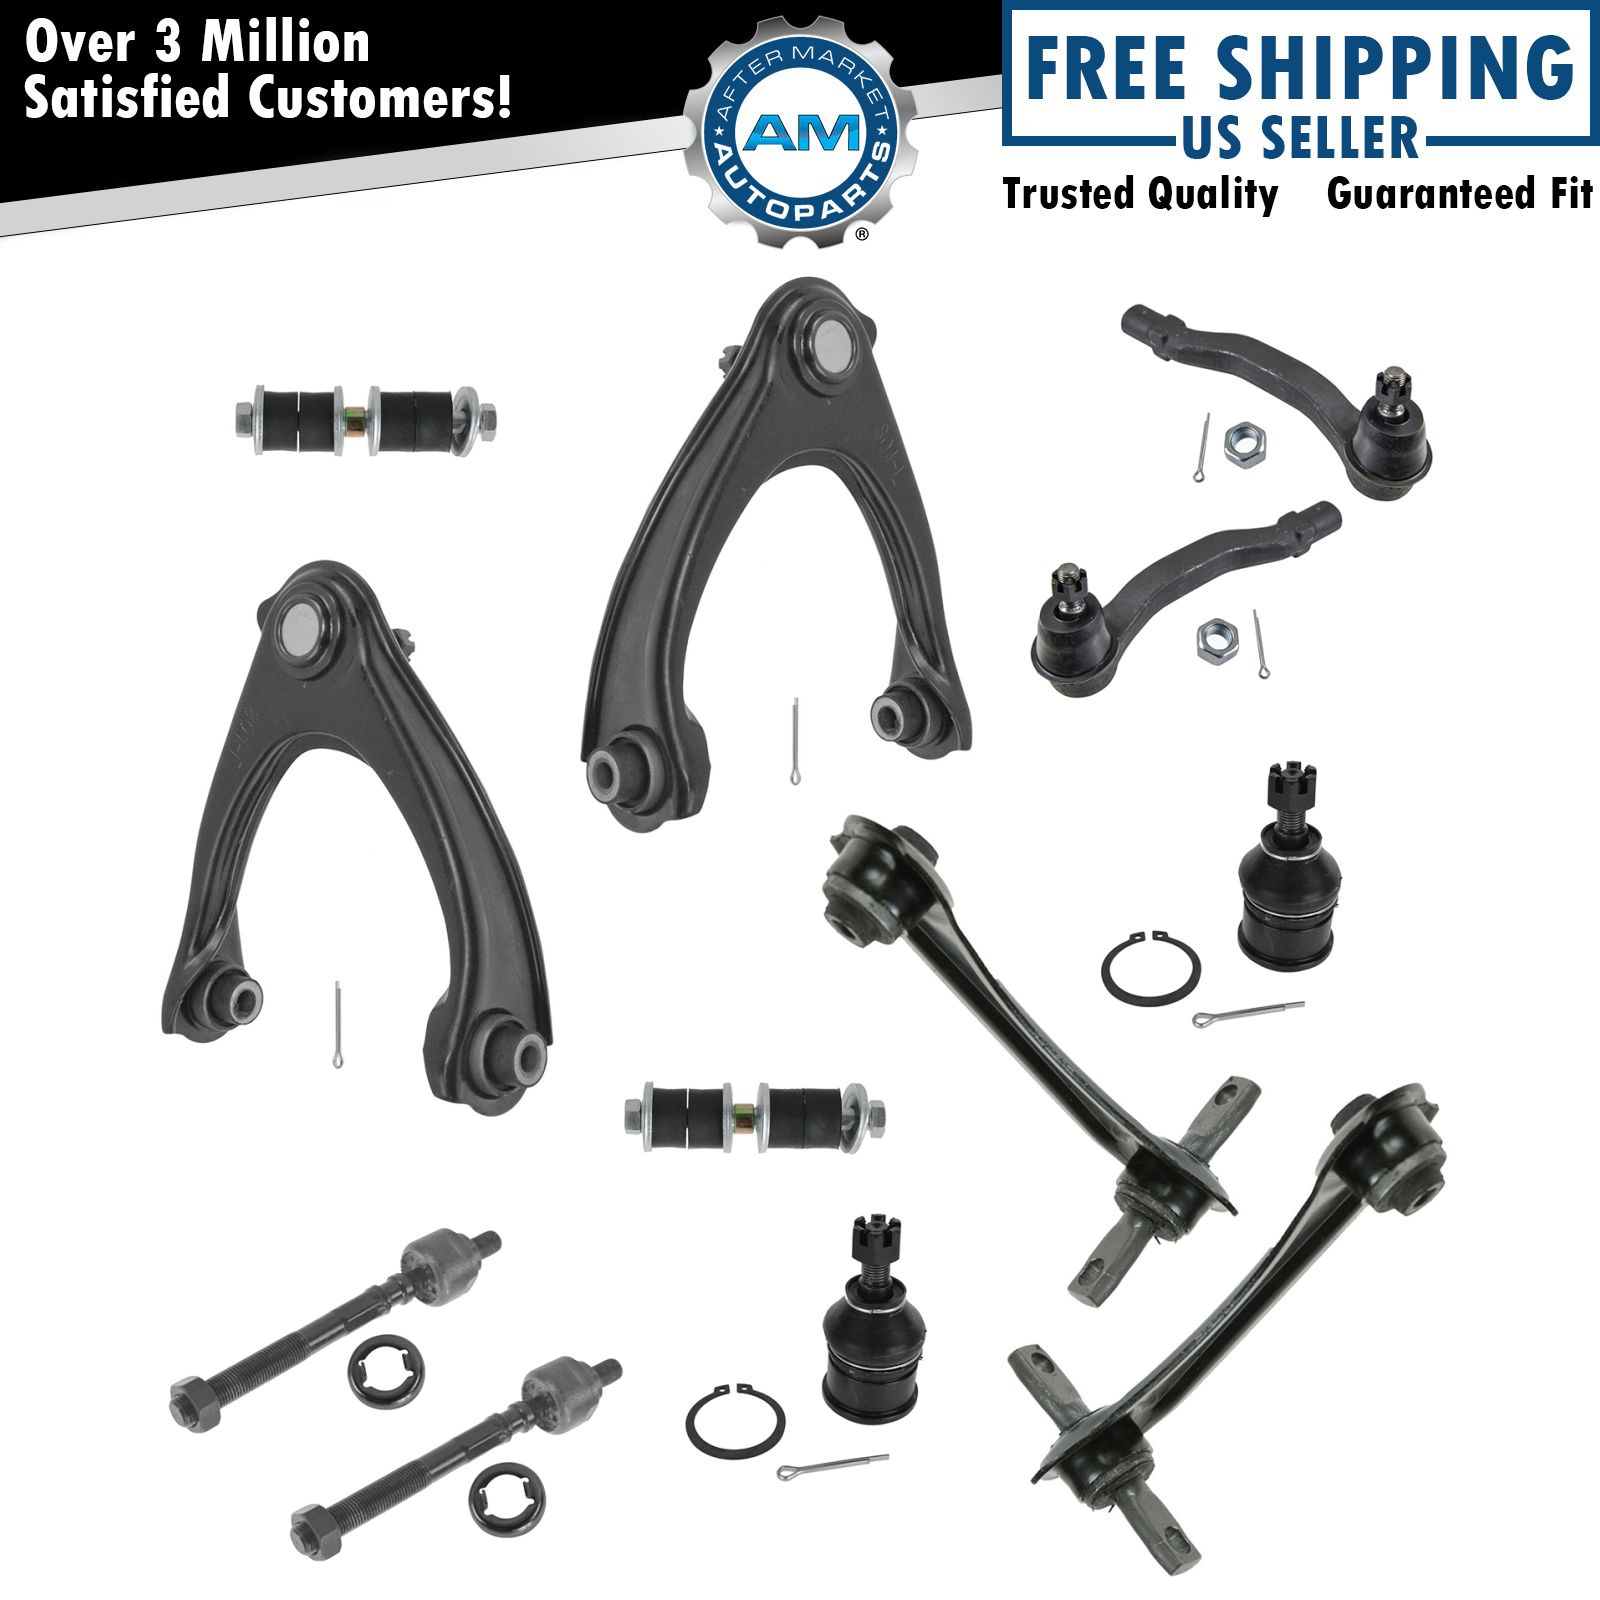 Control Arms Tie Rods Ball Joints Links Suspension Kit for 96-00 Honda Civic